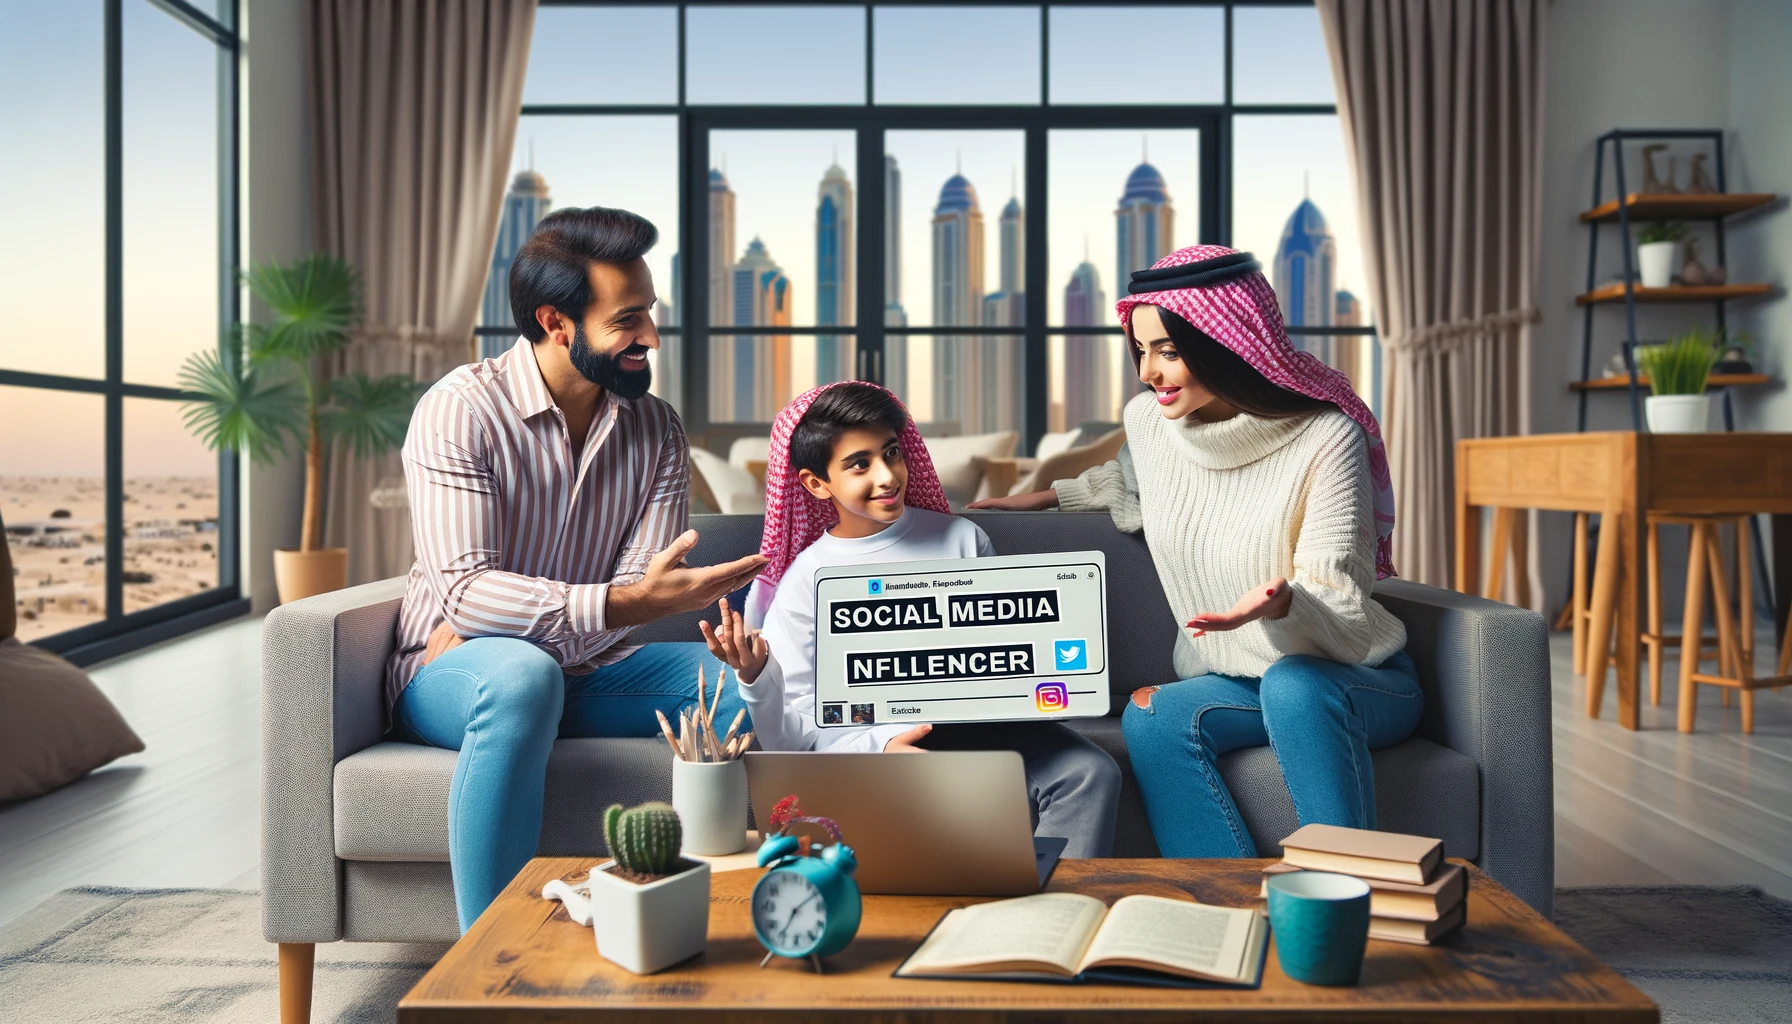 DALL·E 2024 01 05 18.34.22 A family scene in a Dubai home where parents are discussing their childs interest in becoming a social media influencer. The image shows a supportive